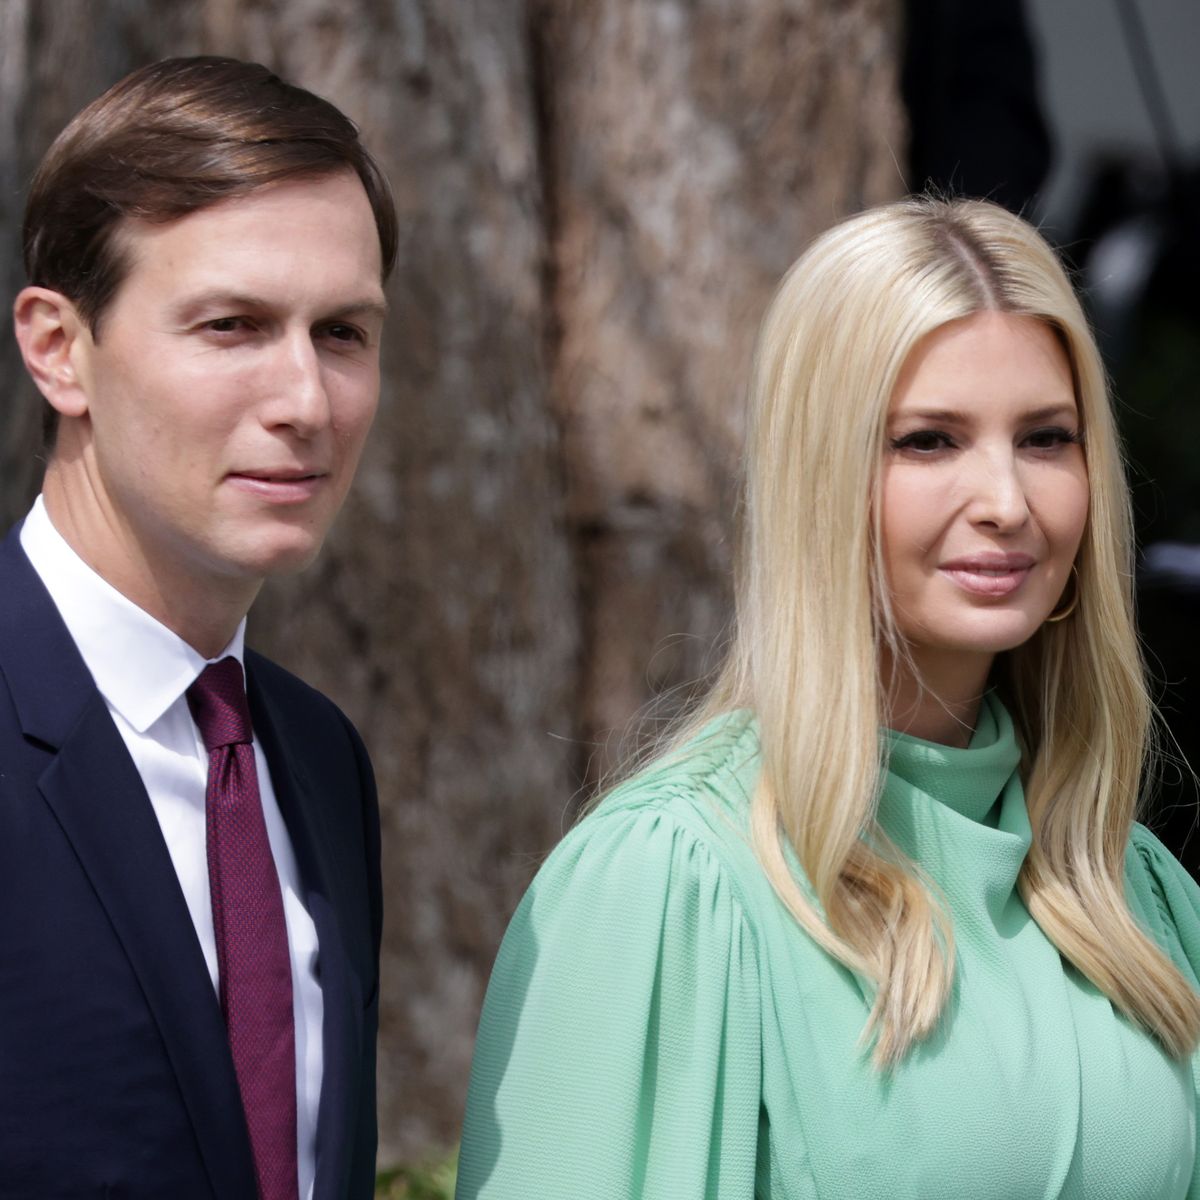 Donald and Ivanka Trump on hand as Louis Vuitton opens US factory